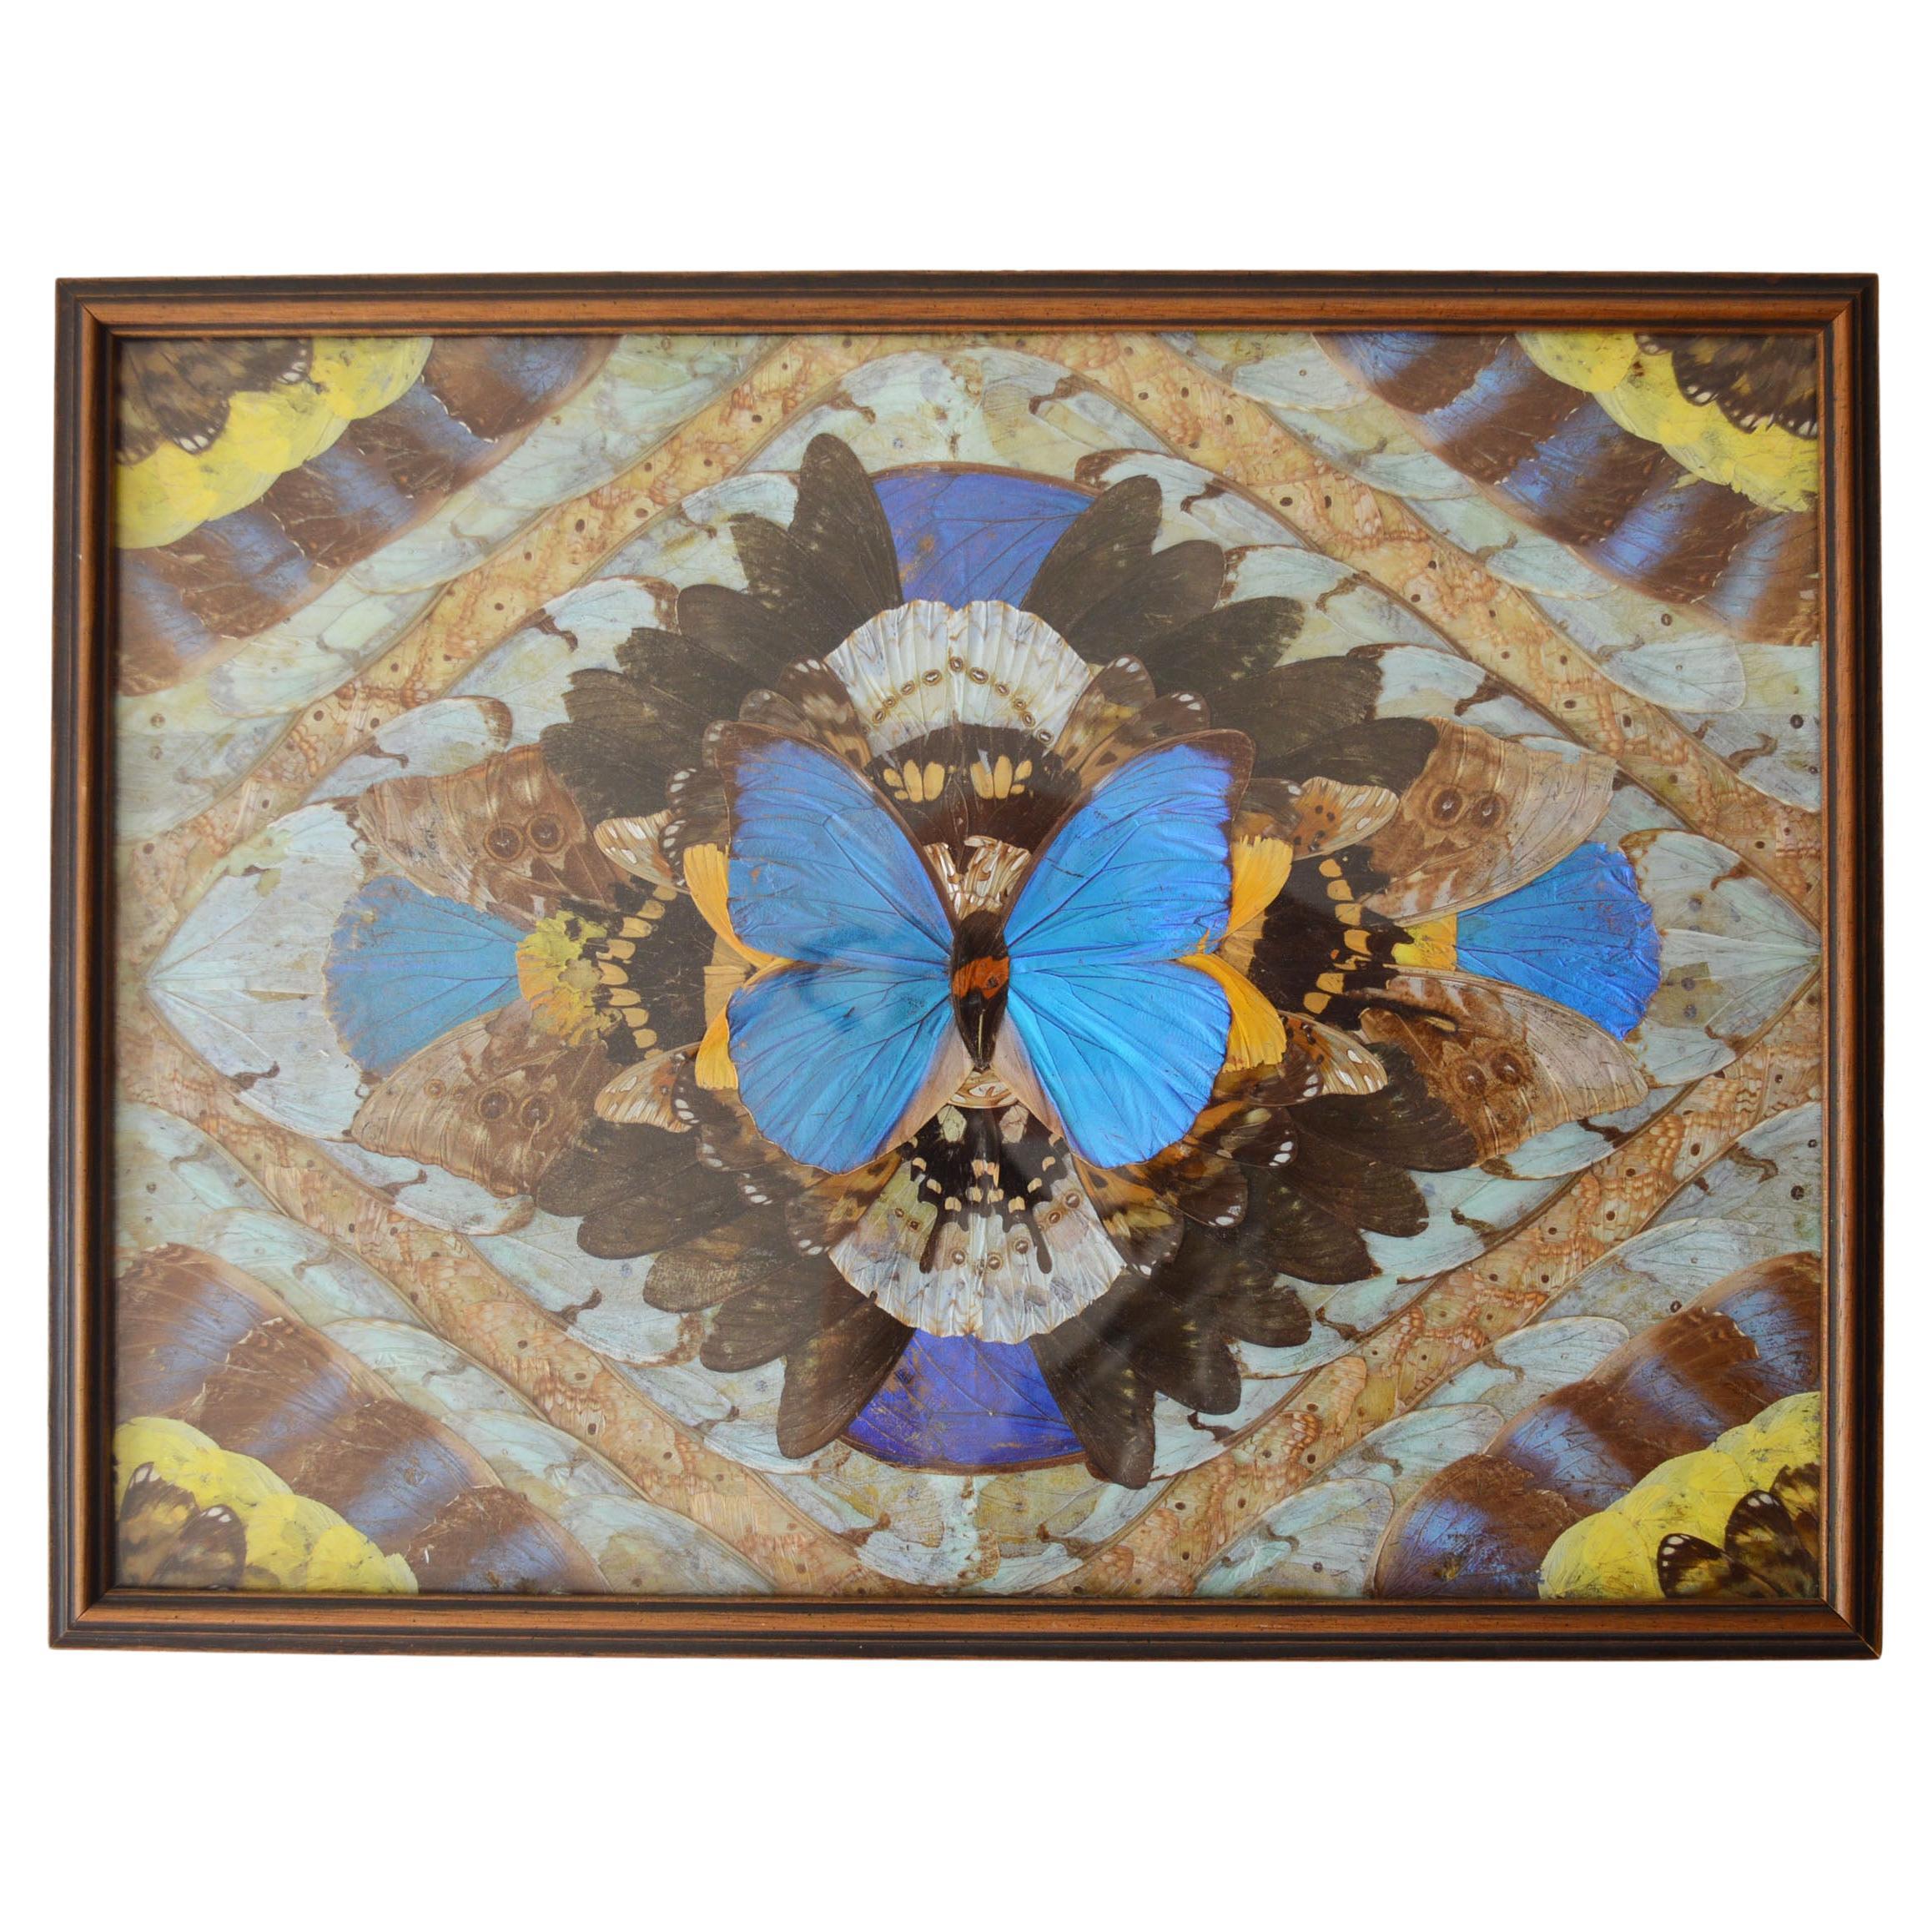 A fine wood framed picture with dazzling geometric patterns made from the wings of the brilliant iridescent Blue Morpho butterfly.  A wonderful eye catching art object  perfect for interior design. C 1950`s 
Size 42 x 30 x 2 cm ,  16.25 x 11.75 x